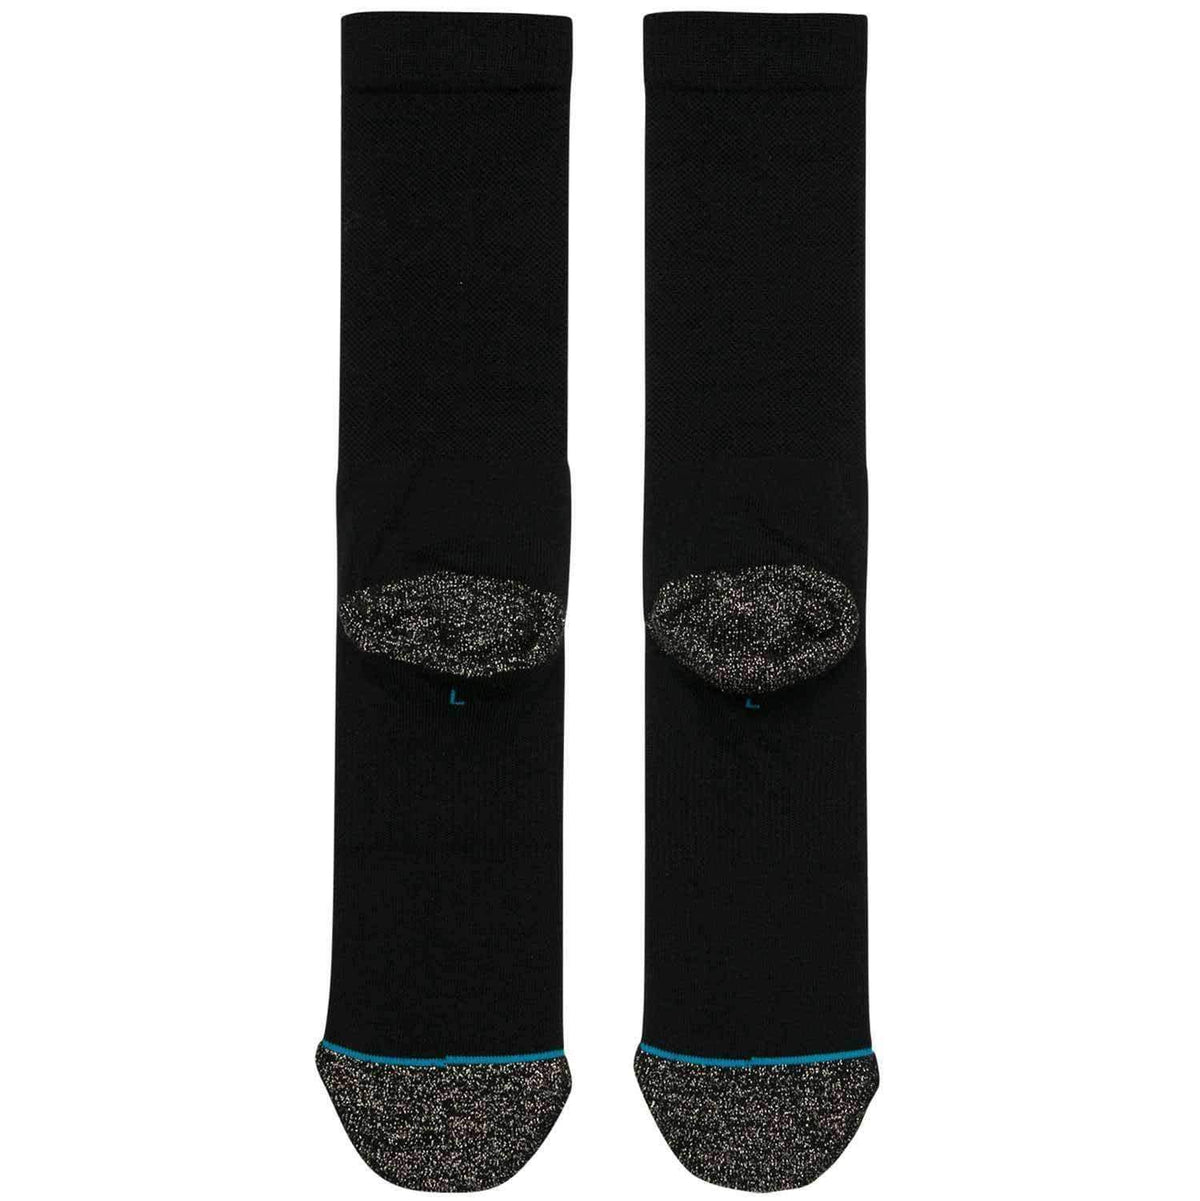 Stance NBA Arena Lakers Trophy Socks in Black/Gold Mens Crew Length Socks by Stance